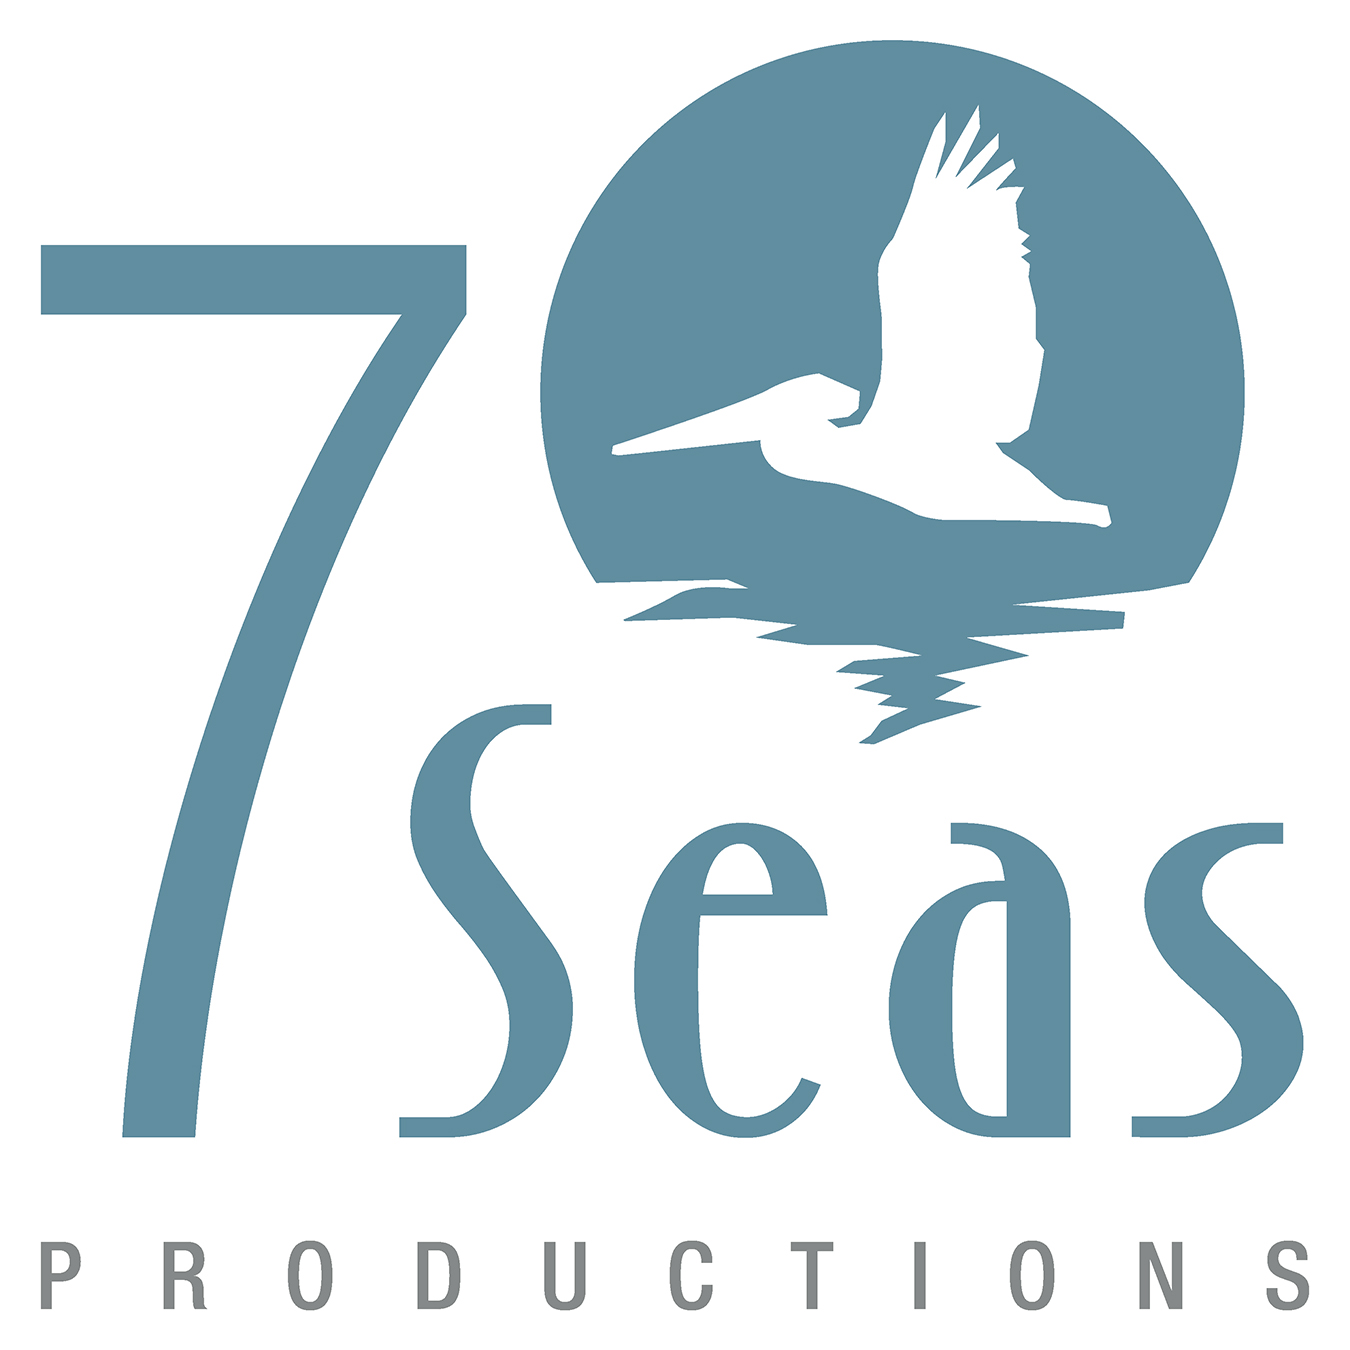 7 Seas Productions / Colombia